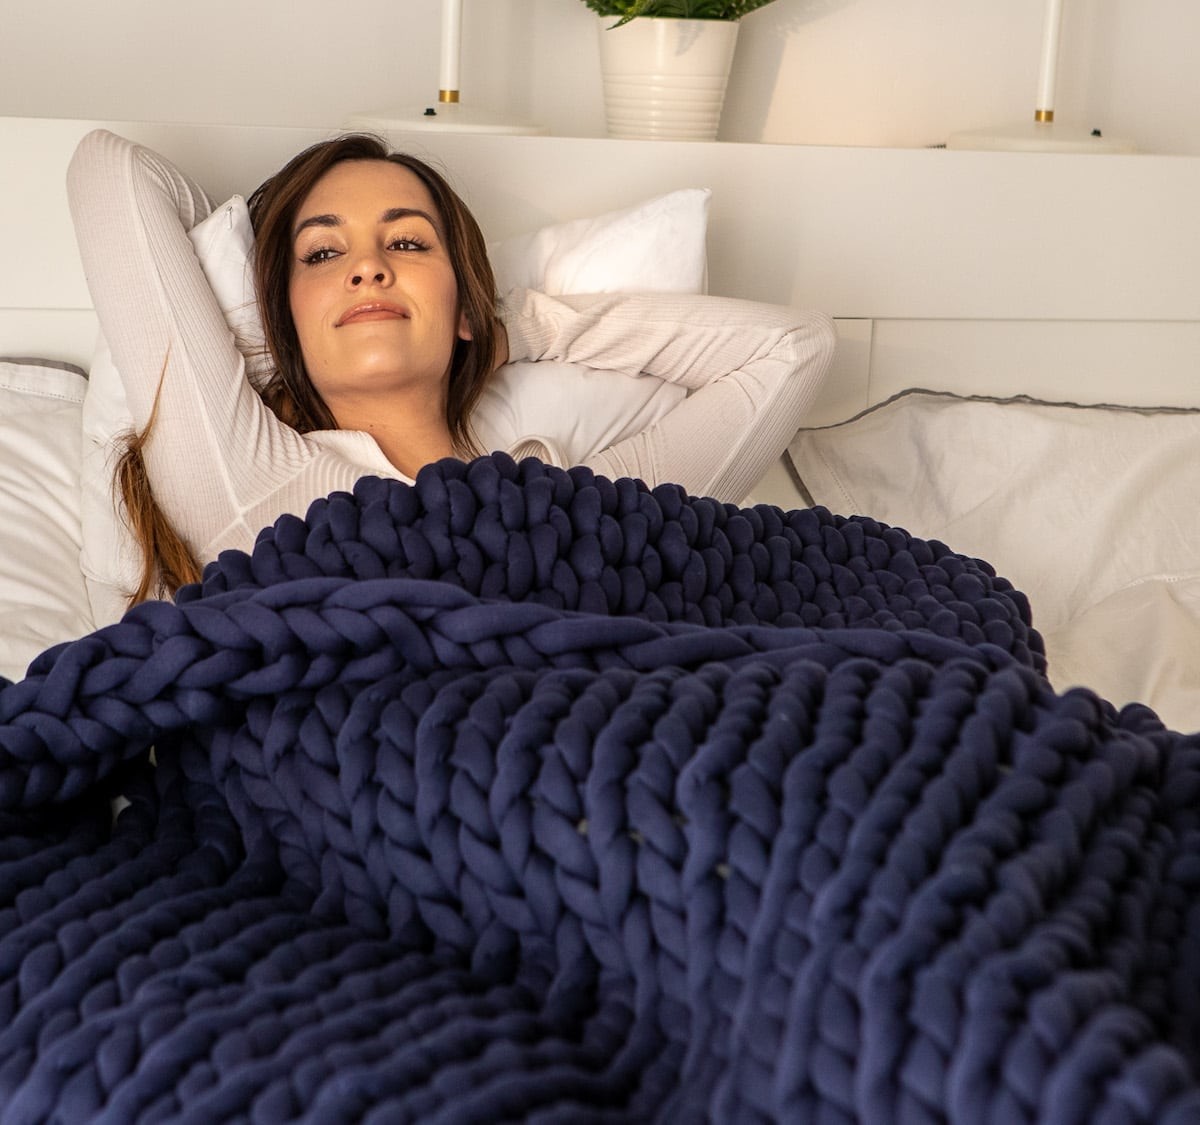 Nuzzie Knit weighted blanket relieves stress while keeping you so cozy